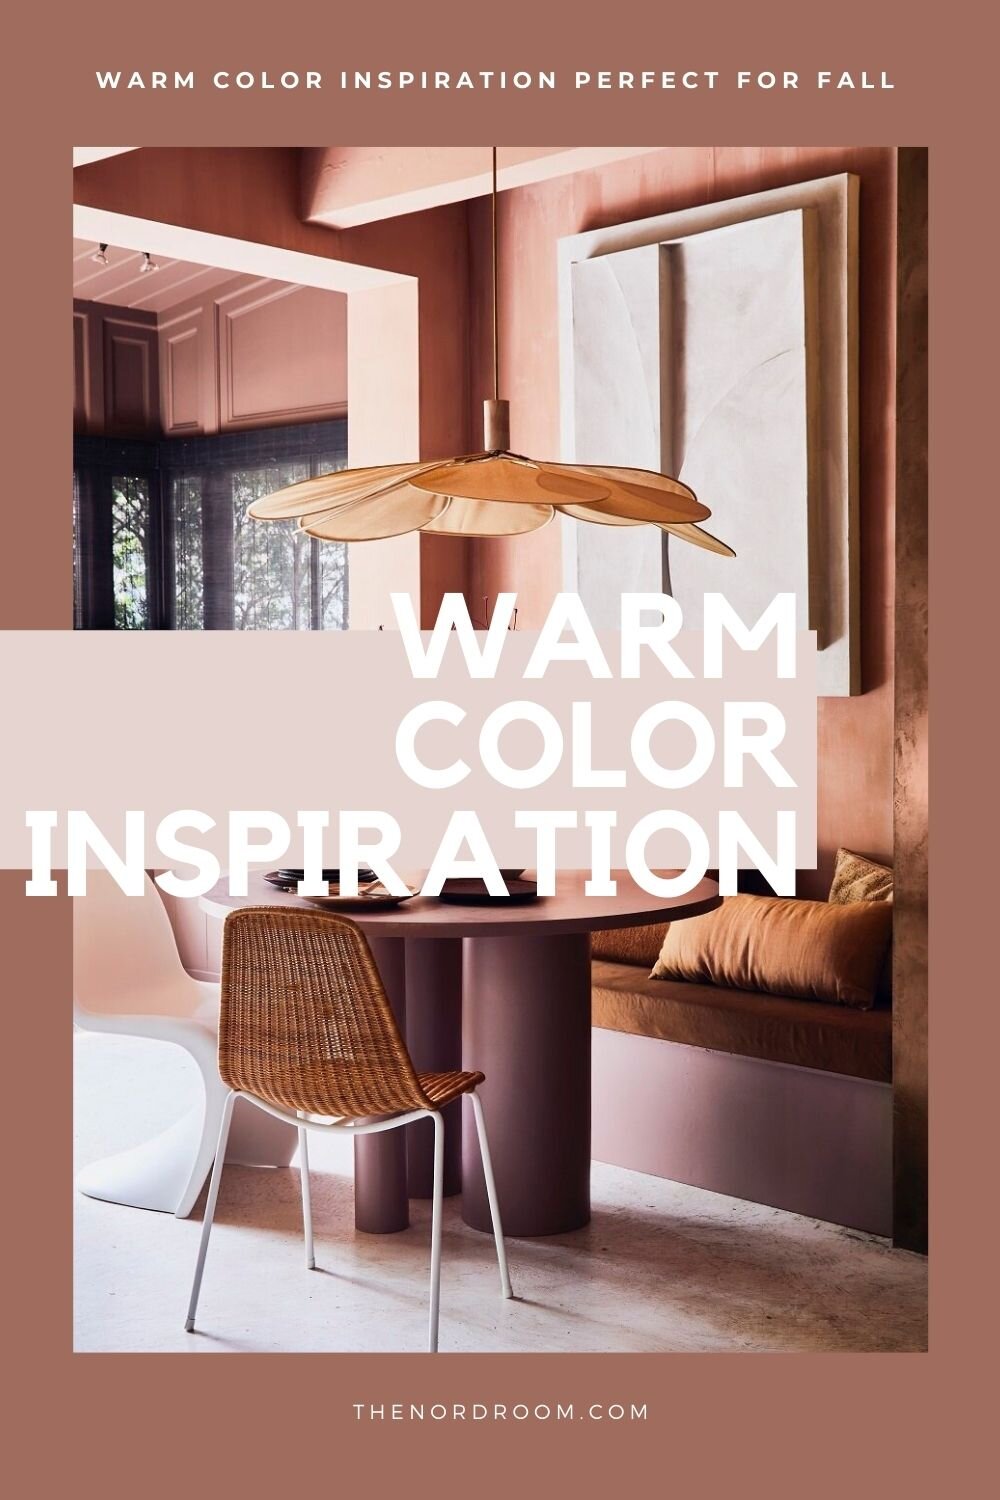 Interiors Decorated with Warm Colors